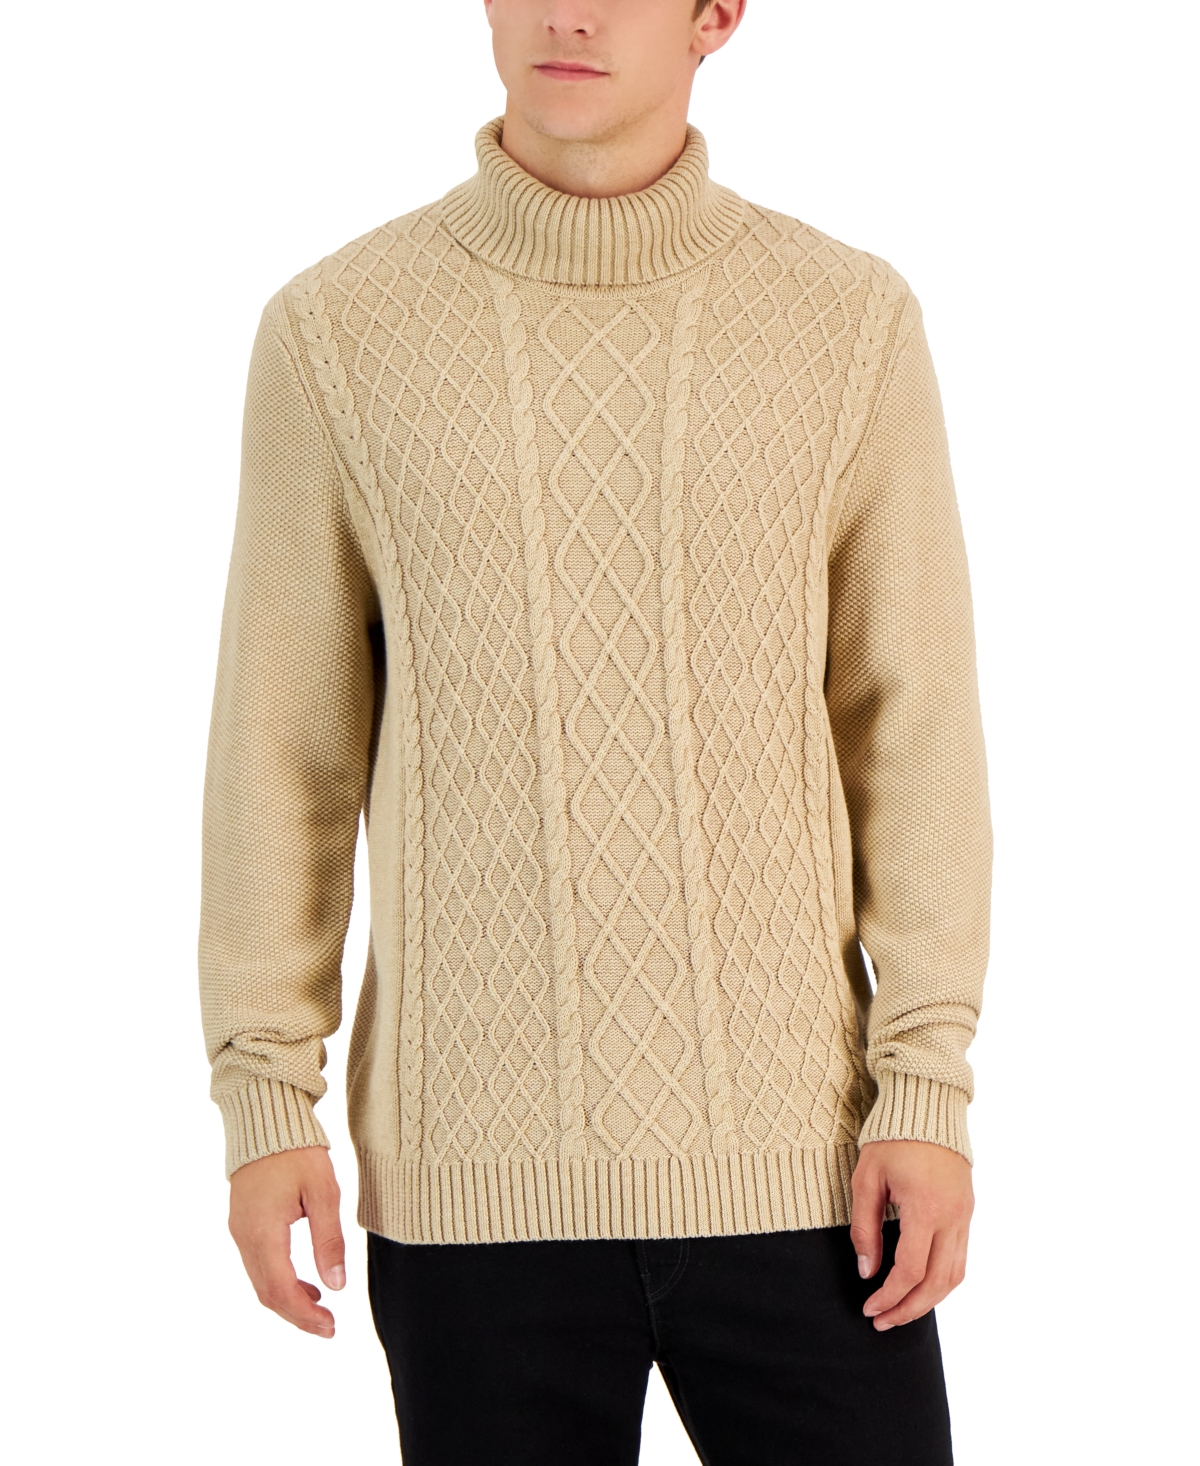 Men's Chunky Turtleneck Sweater, Created for Macy's - Toast Heather